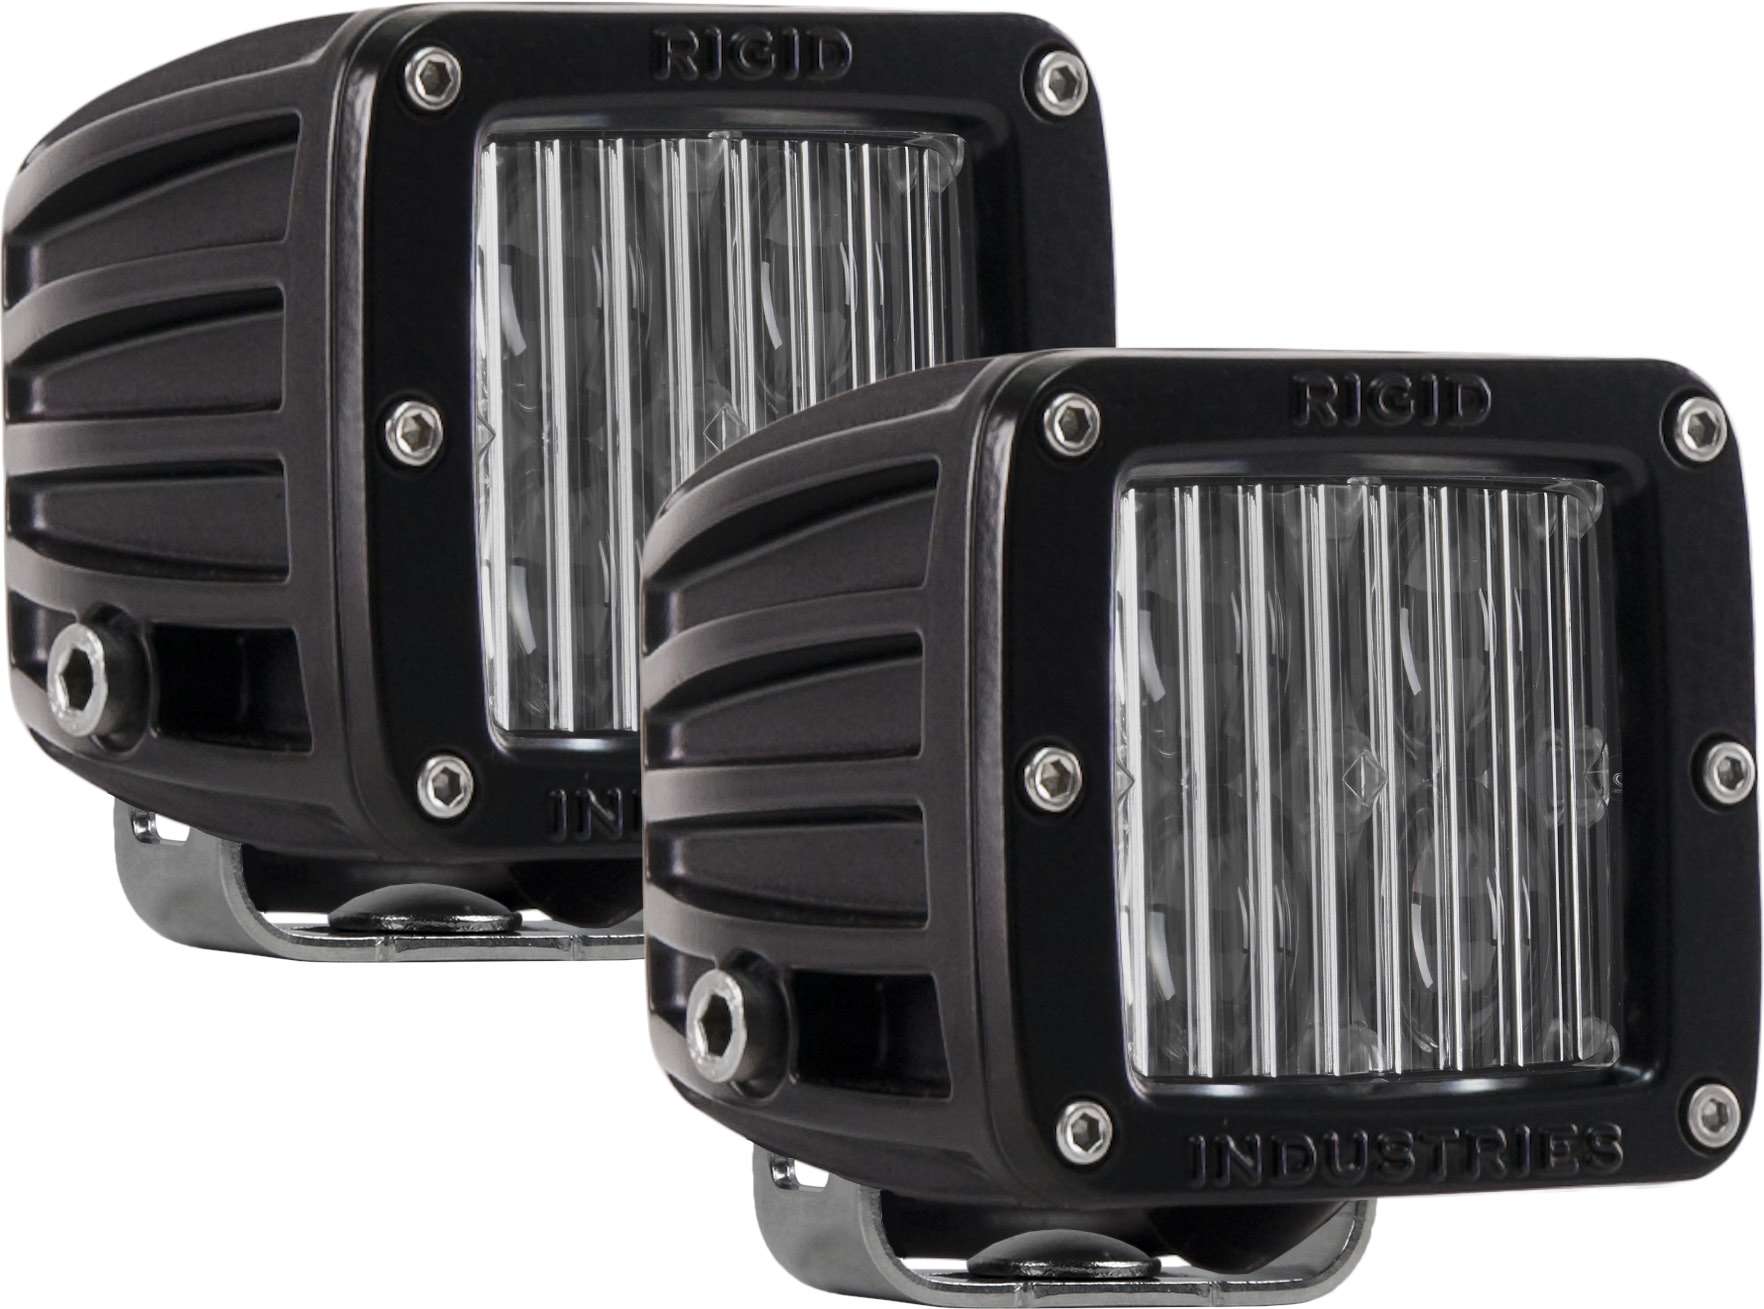 <B>RIGID INDUSTRIES DOT/SAE LIGHTS</b>
The worldwide launch of these lights will be at the Classic, which will make the world championship even brighter. The big news is that these lights are DOT/SAE compliant, meaning itâs legal to drive with them on the street. Available in the Dually Fog Light set and the 6-inch E-series Auxiliary High Beam Driving Light set, these Rigid lights offer a brighter and smoother beam pattern than has ever been available in street-legal lights. 